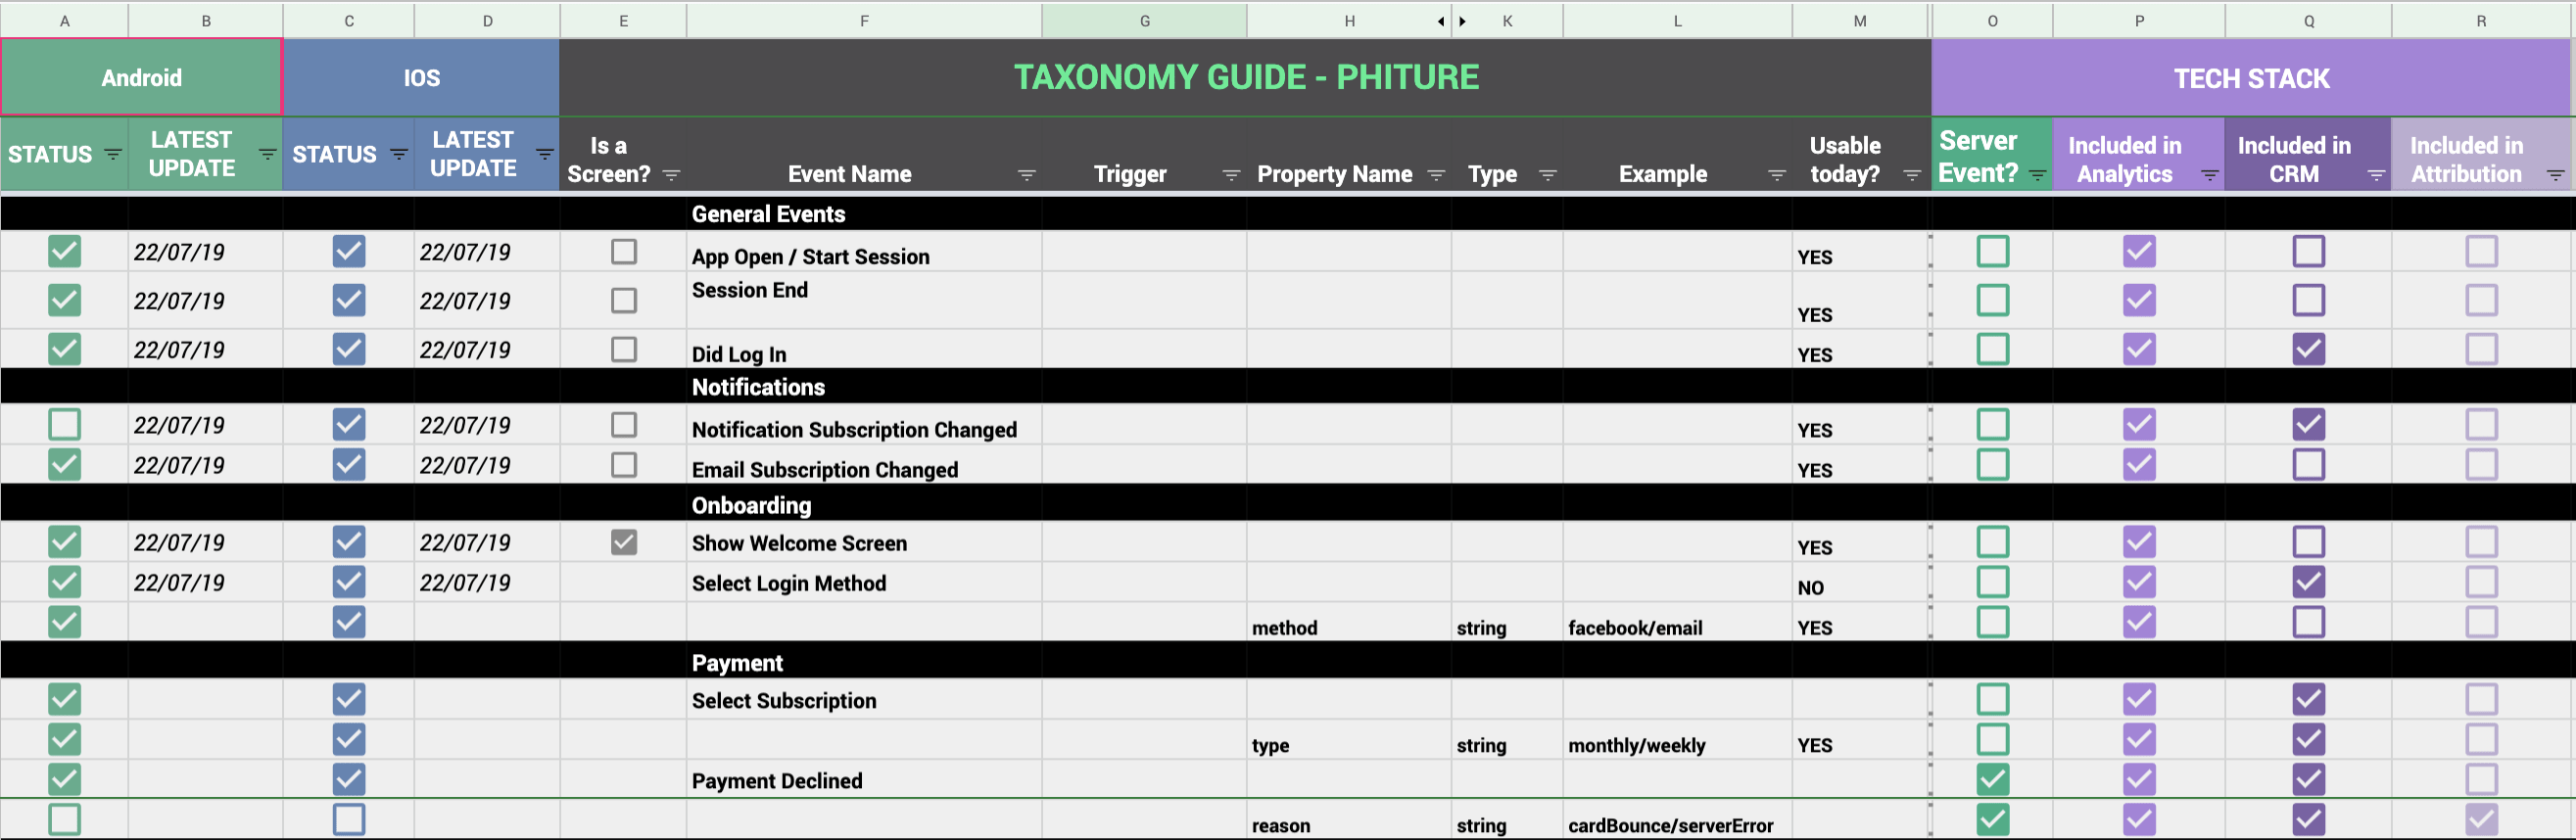 Phiture taxonomy guide